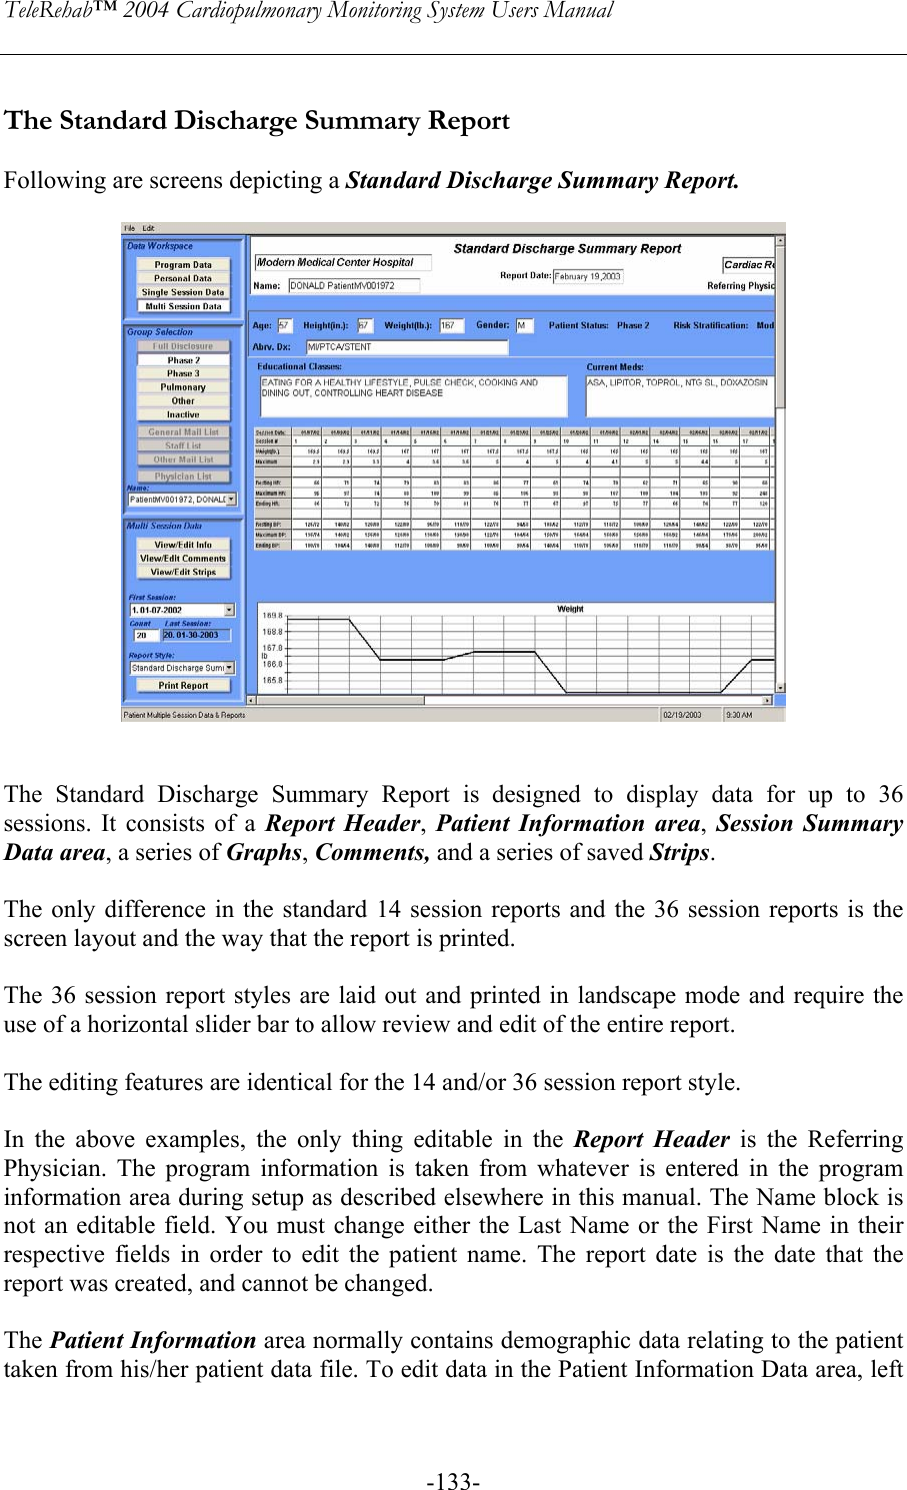 TeleRehab™ 2004 Cardiopulmonary Monitoring System Users Manual    -133- The Standard Discharge Summary Report  Following are screens depicting a Standard Discharge Summary Report.     The Standard Discharge Summary Report is designed to display data for up to 36 sessions. It consists of a Report Header,  Patient Information area,  Session Summary Data area, a series of Graphs, Comments, and a series of saved Strips.  The only difference in the standard 14 session reports and the 36 session reports is the screen layout and the way that the report is printed.   The 36 session report styles are laid out and printed in landscape mode and require the use of a horizontal slider bar to allow review and edit of the entire report.   The editing features are identical for the 14 and/or 36 session report style.    In the above examples, the only thing editable in the Report Header is the Referring Physician. The program information is taken from whatever is entered in the program information area during setup as described elsewhere in this manual. The Name block is not an editable field. You must change either the Last Name or the First Name in their respective fields in order to edit the patient name. The report date is the date that the report was created, and cannot be changed.  The Patient Information area normally contains demographic data relating to the patient taken from his/her patient data file. To edit data in the Patient Information Data area, left 